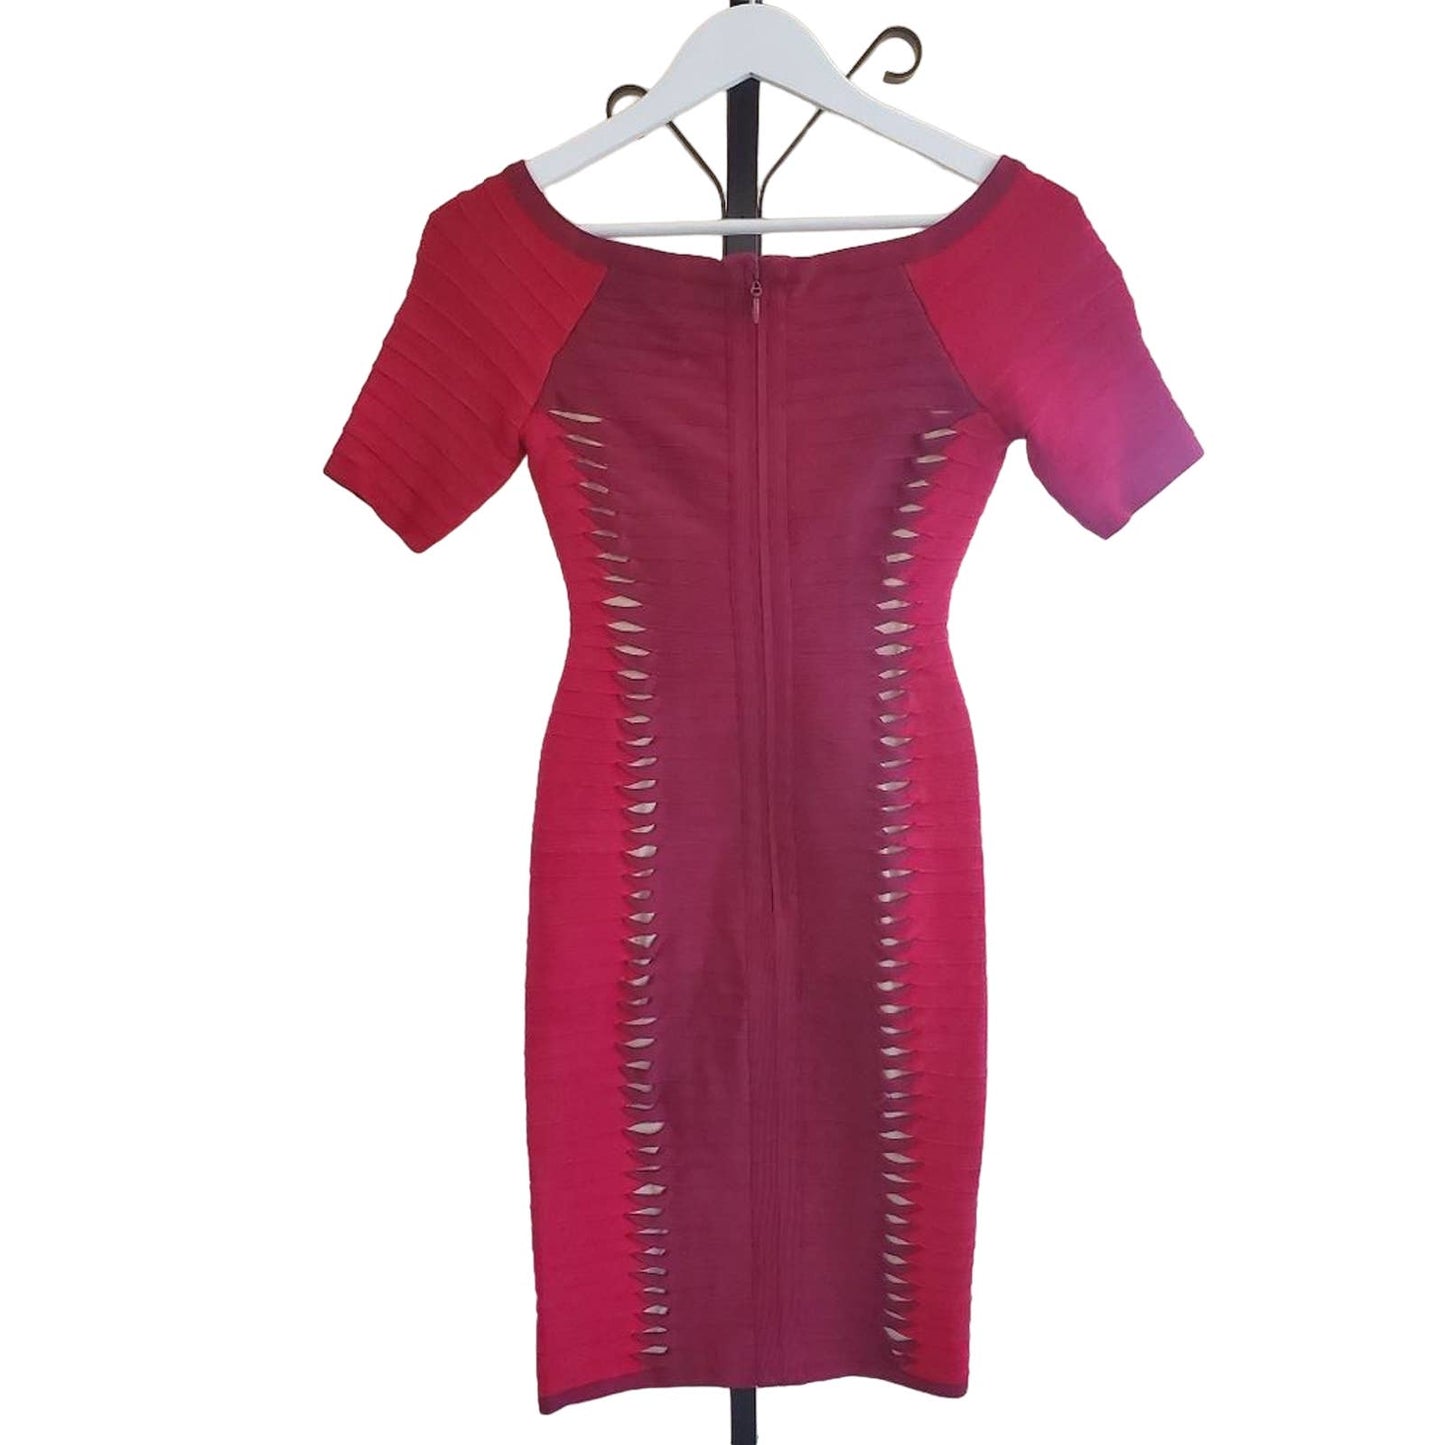 HERVE LEGER Red Short Sleeve Bodycon Bandage Scoop Neck Dress, Size X-Small